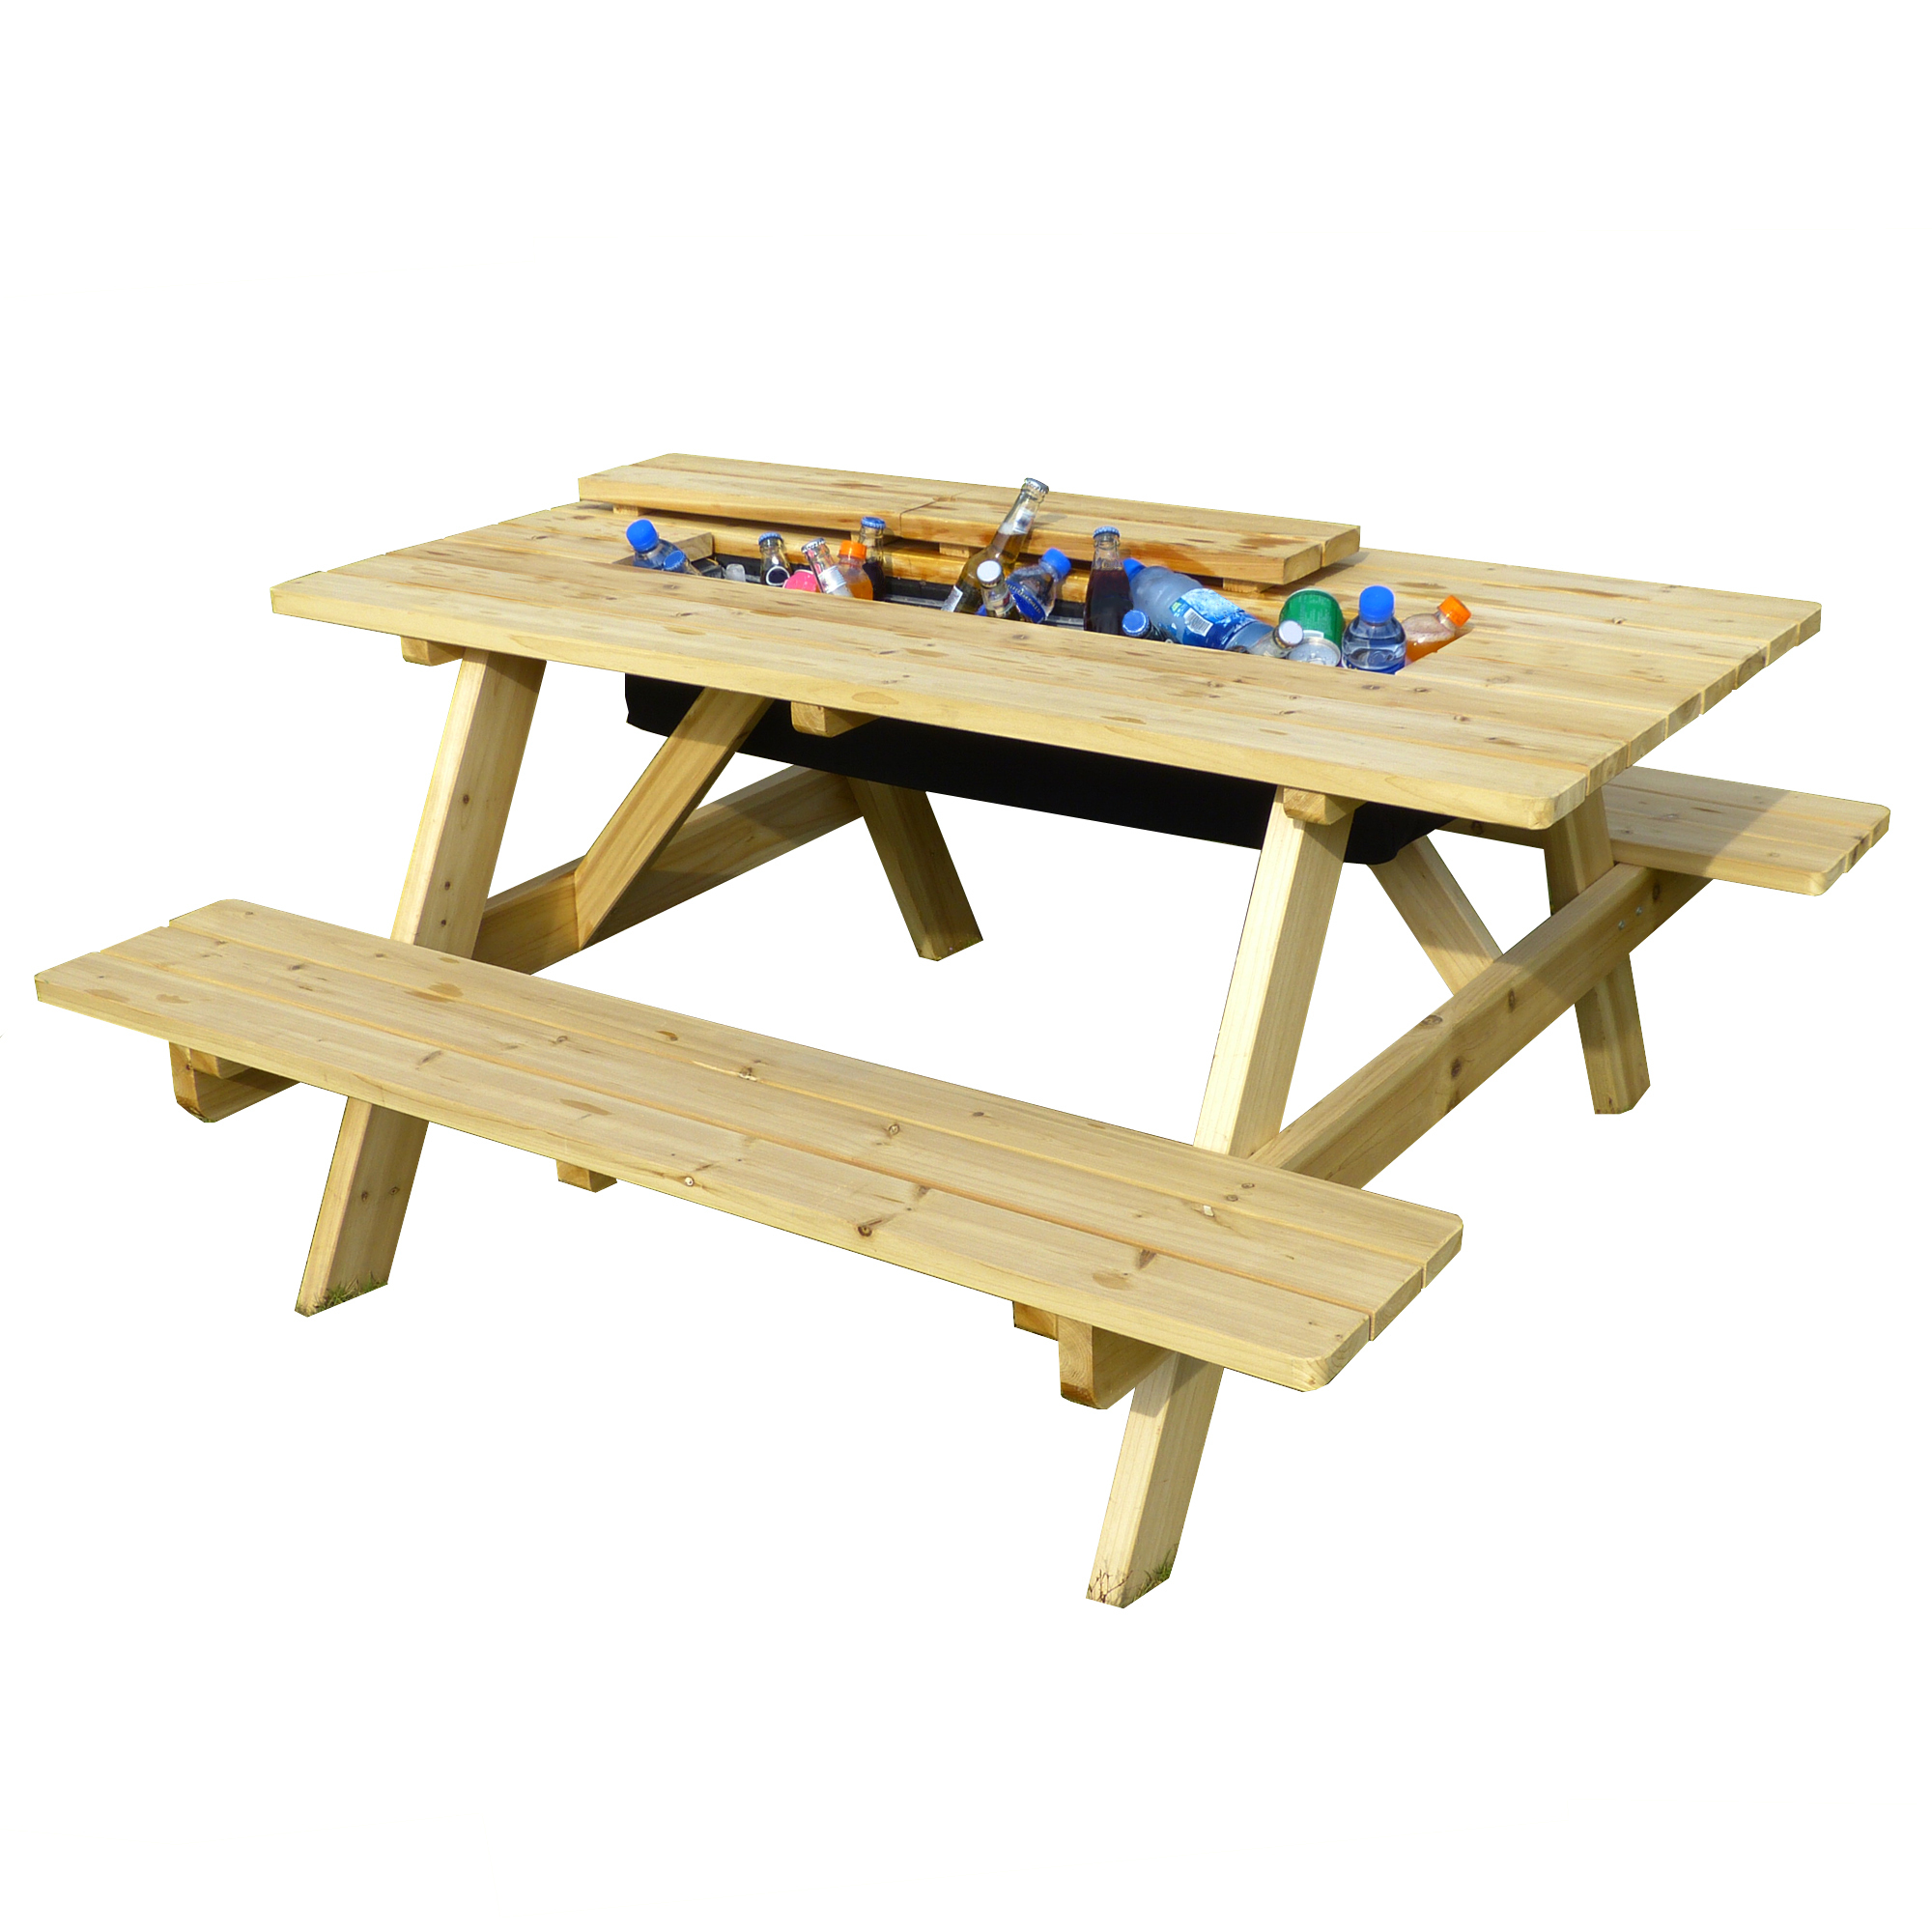 Merry Products, Cooler Picnic Table Kit, Primary Color Natural, Material Wood, Width 60.04 in, Model TBC010001910